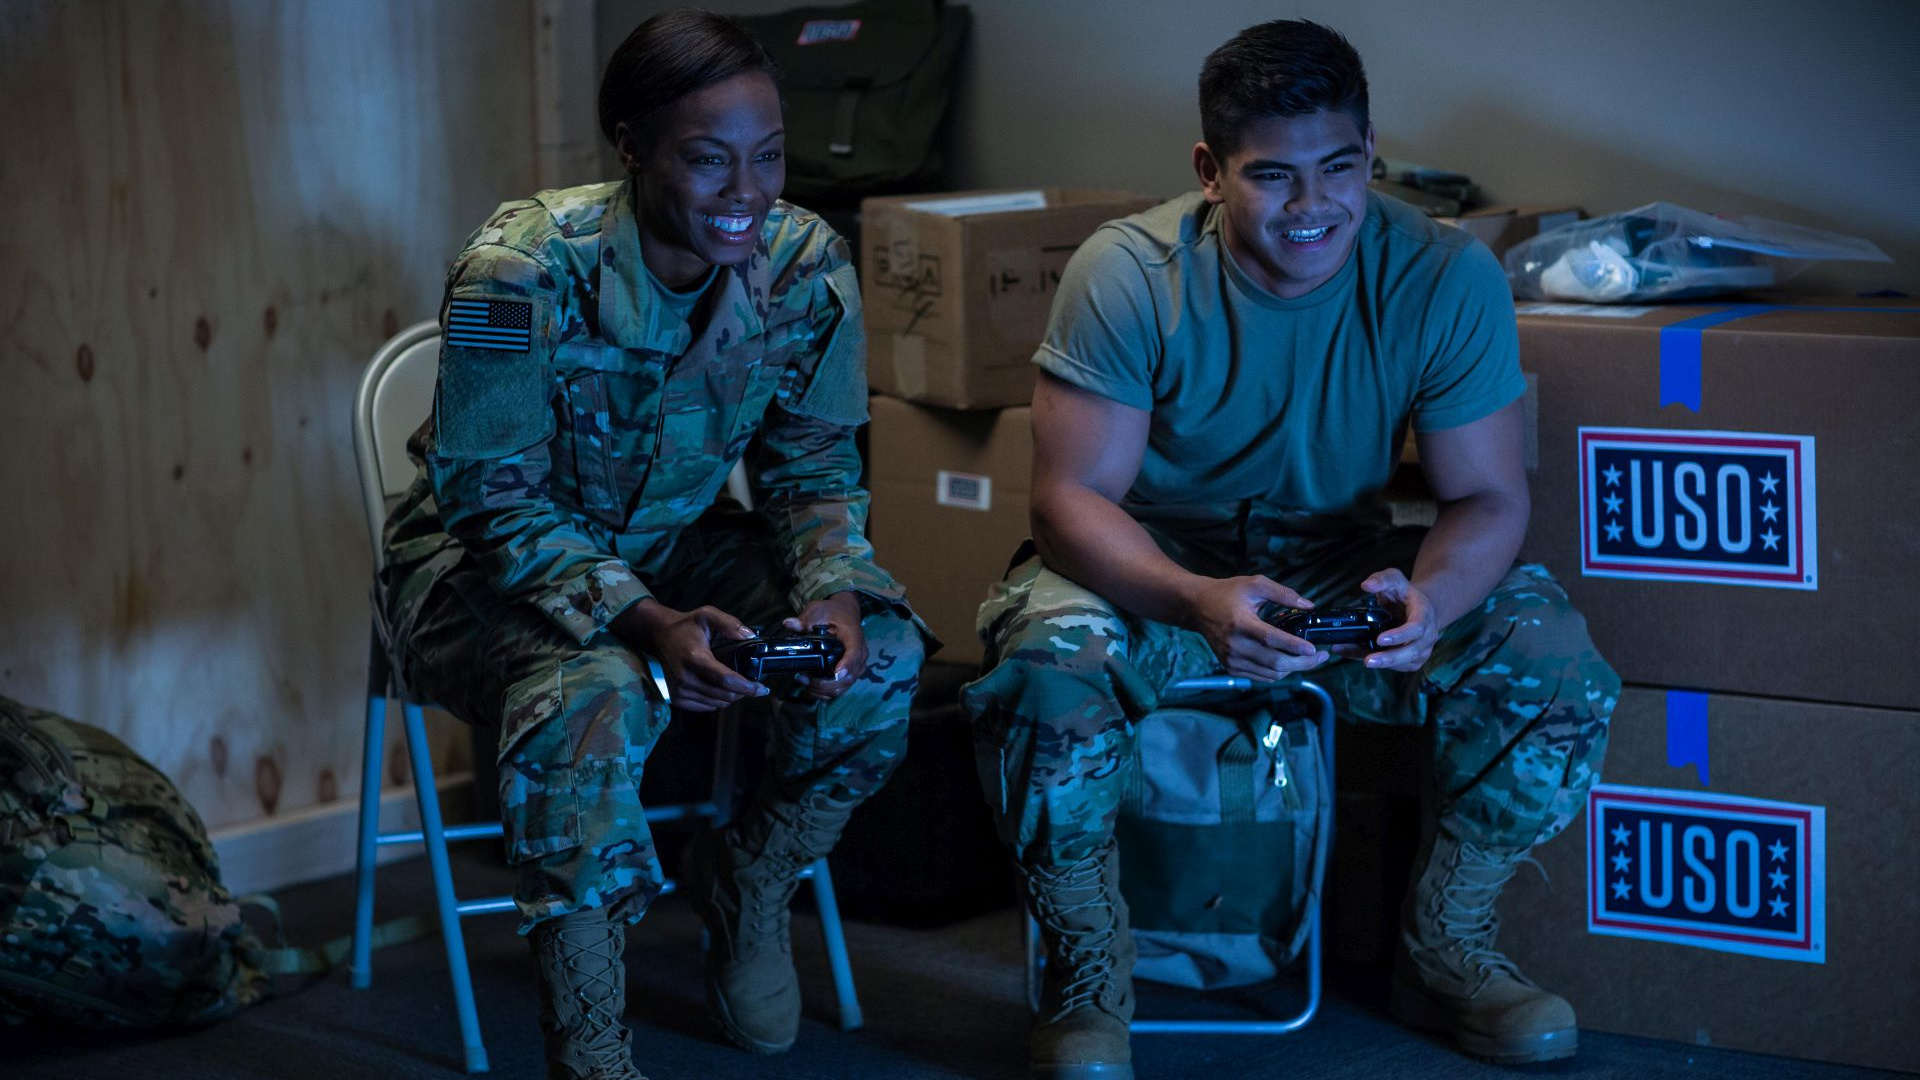 Register now for the next USO Career Kickstarts with Xbox on